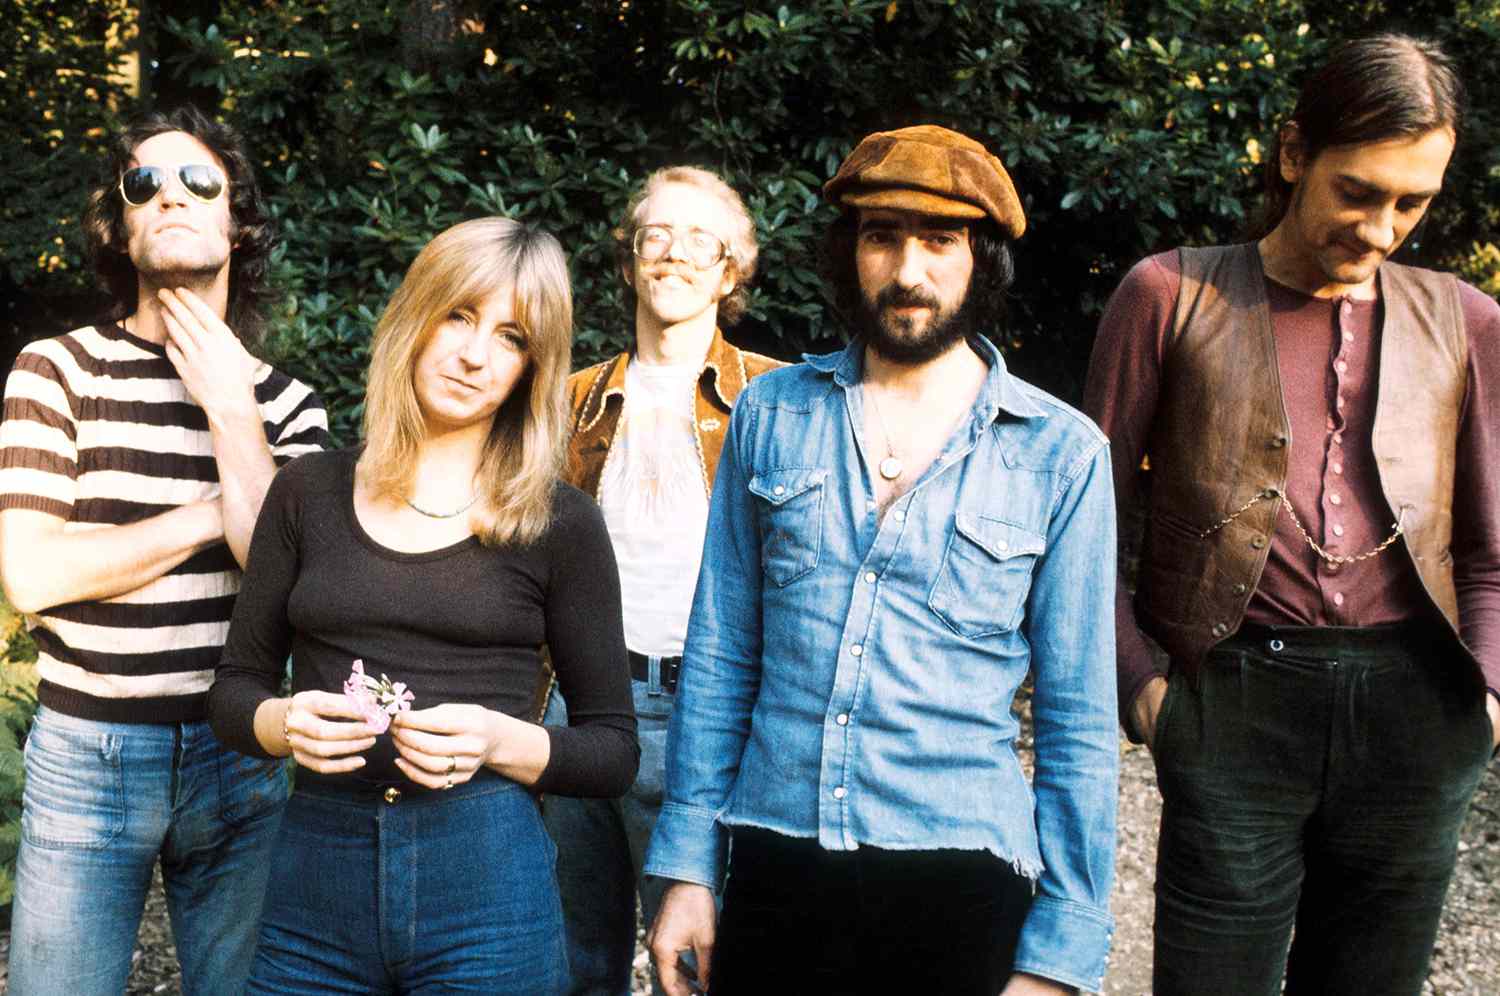 Who Is The Lead Singer Of Fleetwood Mac